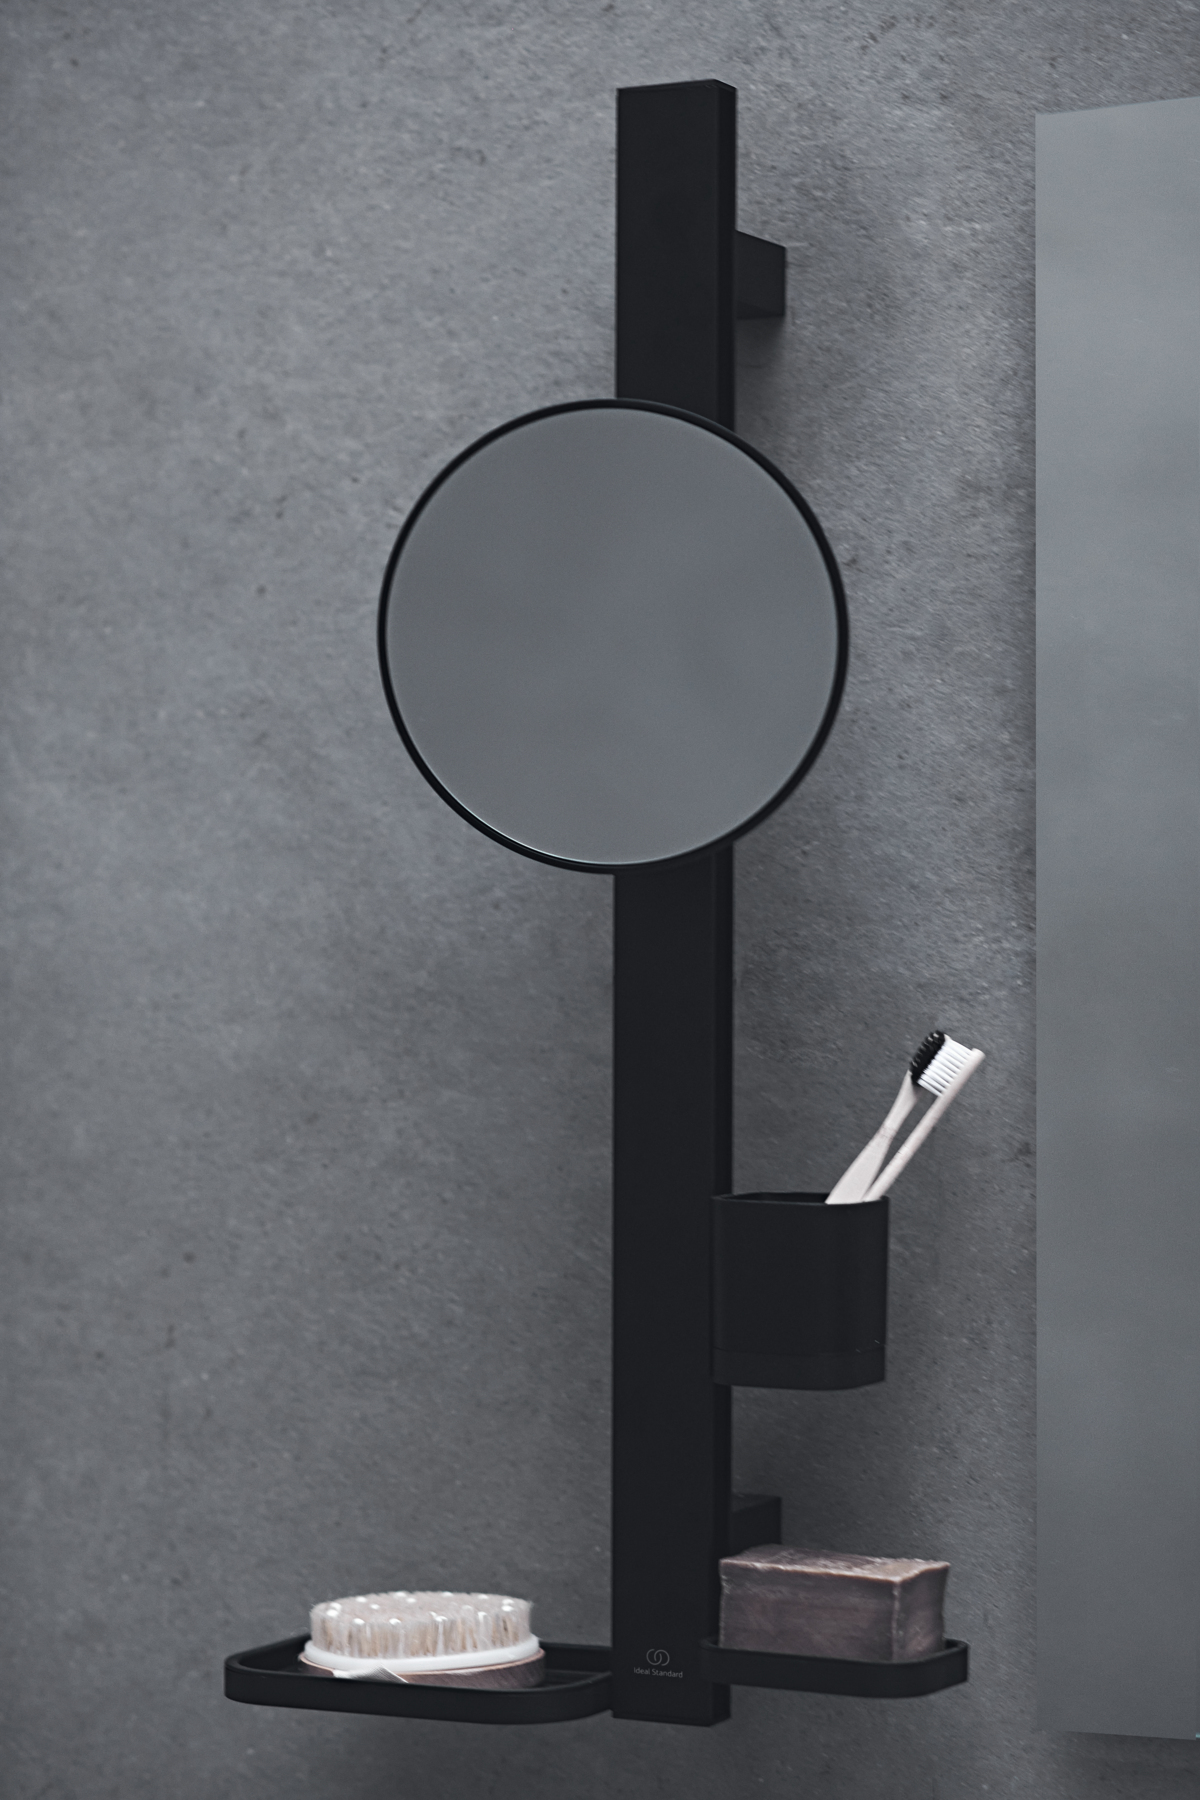 shower mirror and storage solutions intergrated into the matt black shower fitting by Ideal Standard